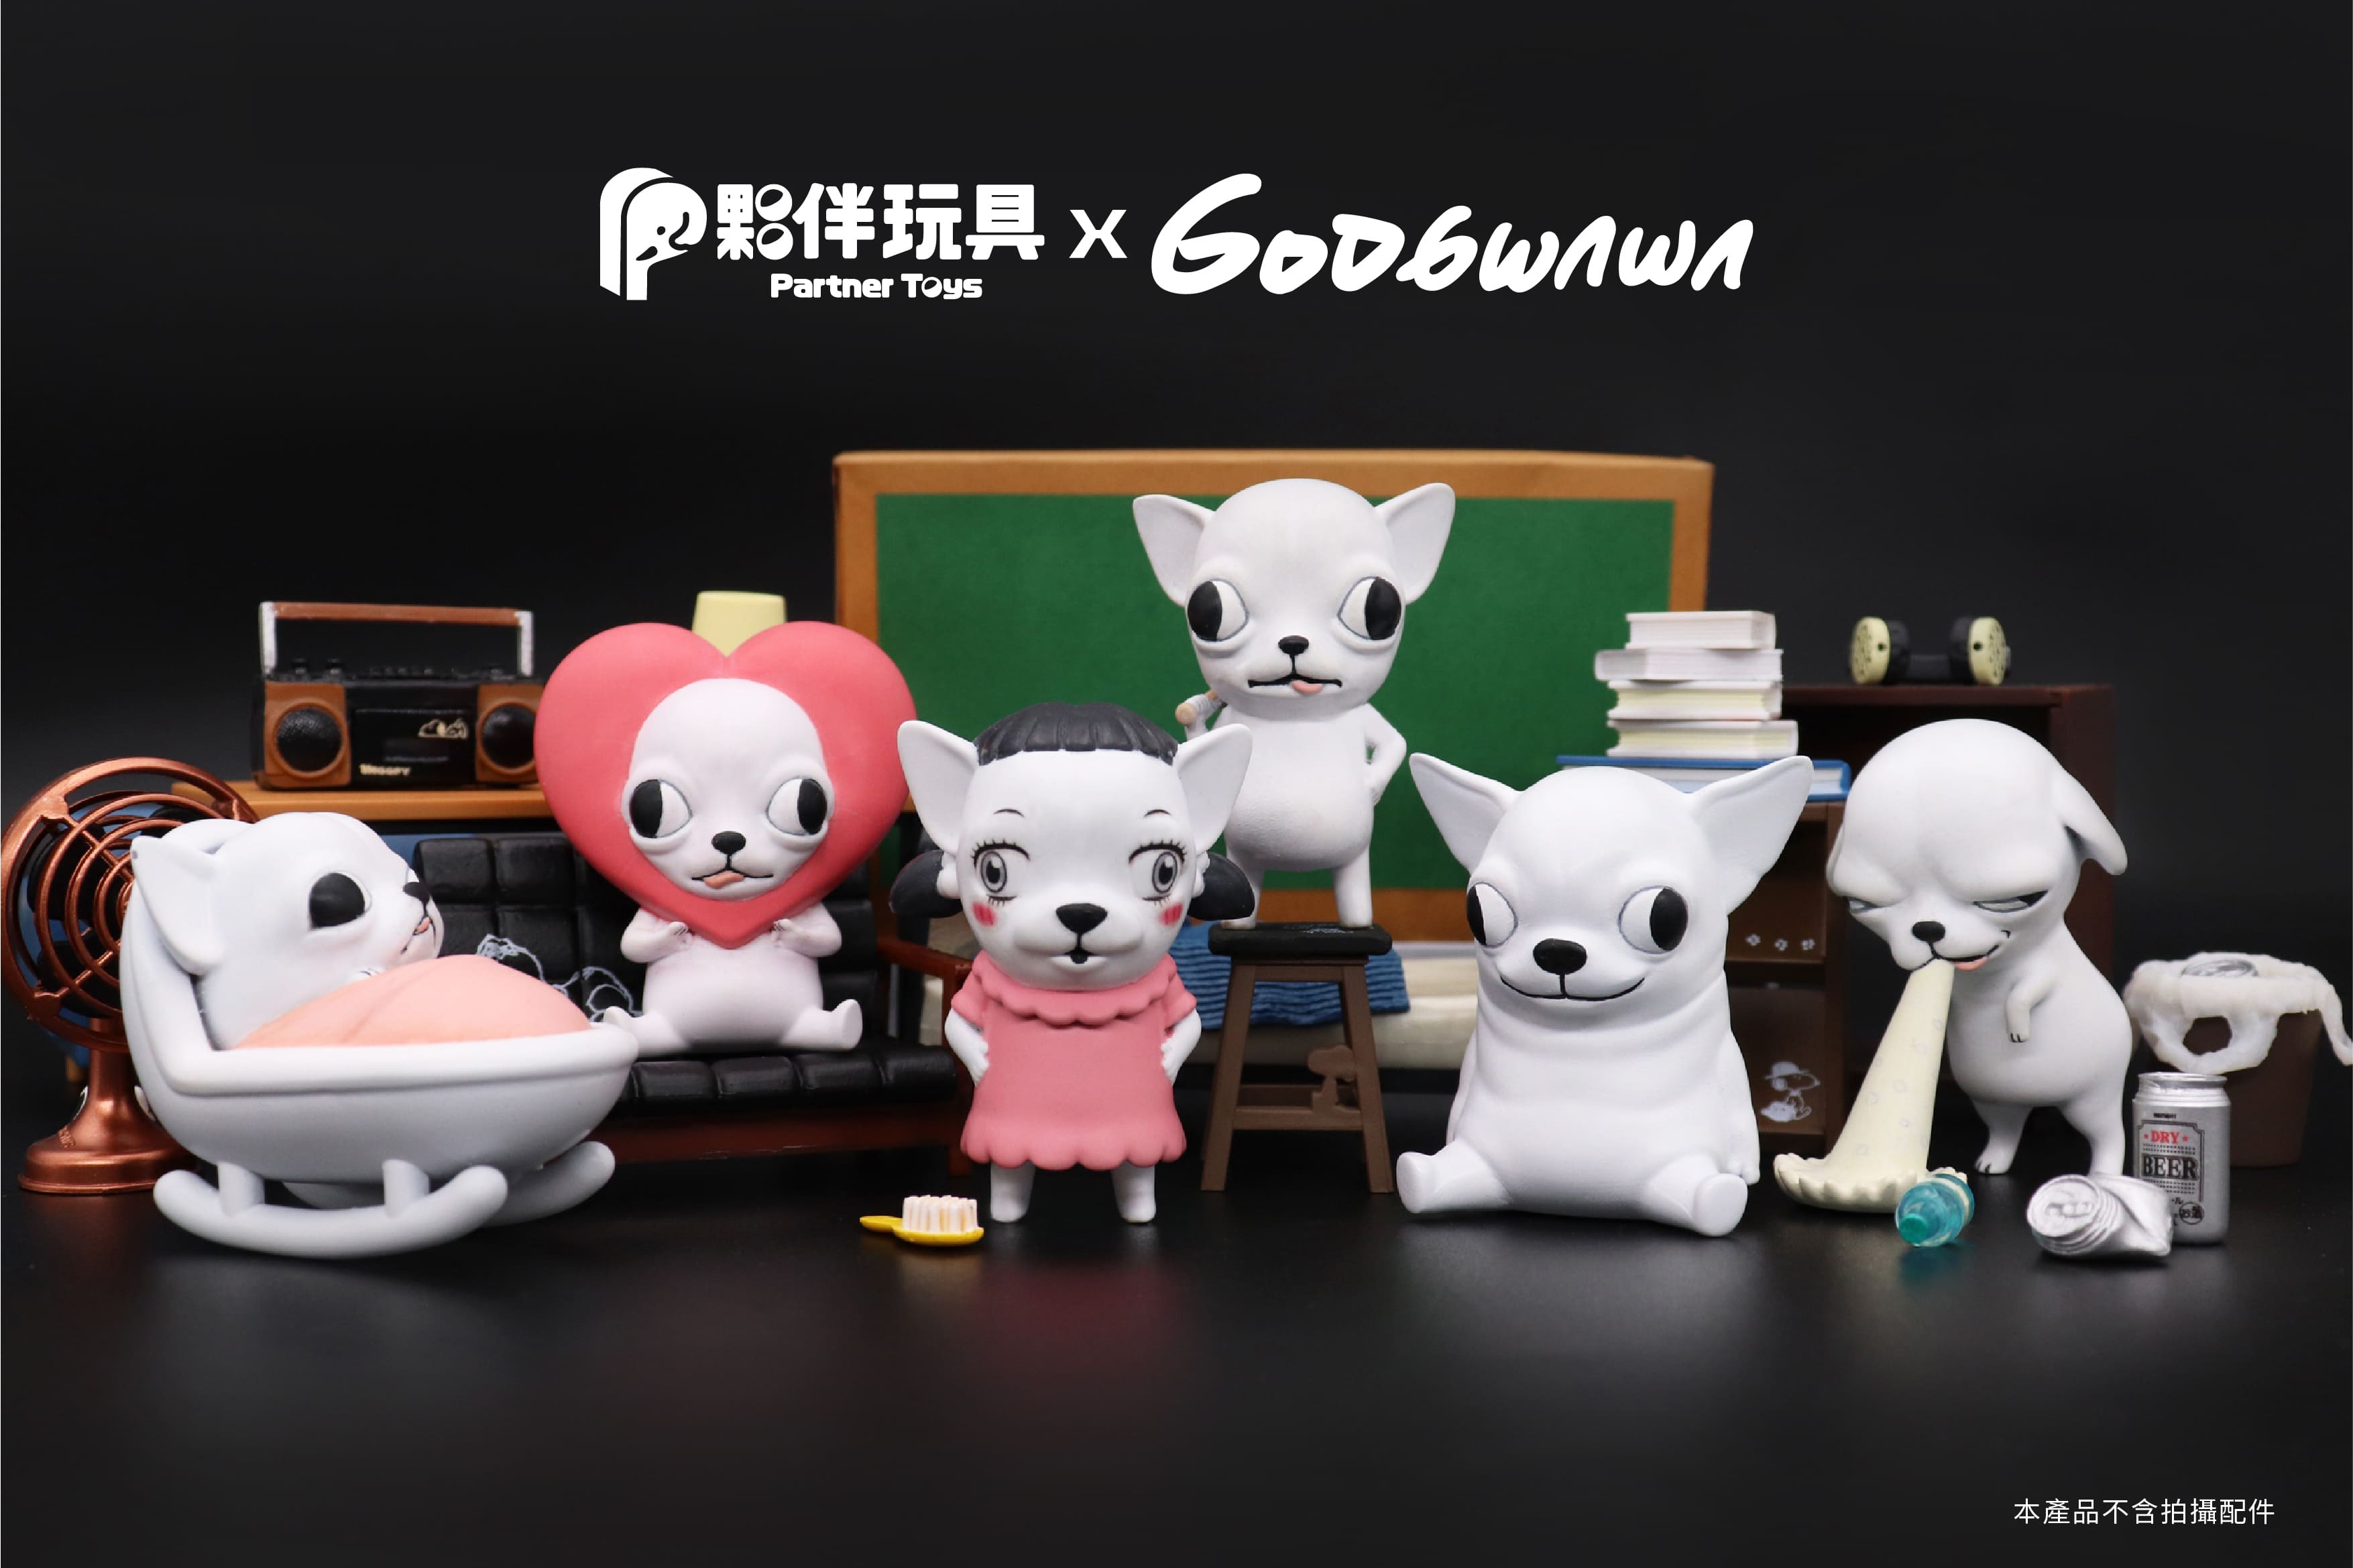 Godgwawa Gacha Series: A group of toy animal figurines, including a cat, dog, and bear, with unique designs.